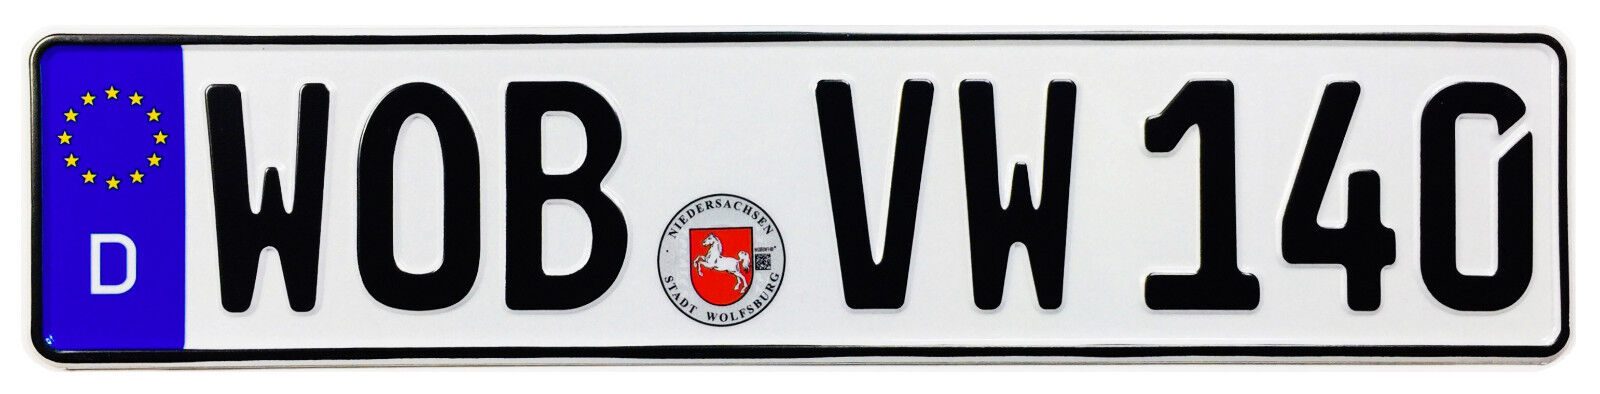 VW Wolfsburg Front German License Plate (WOB) by Z Plates with Unique Number NEW